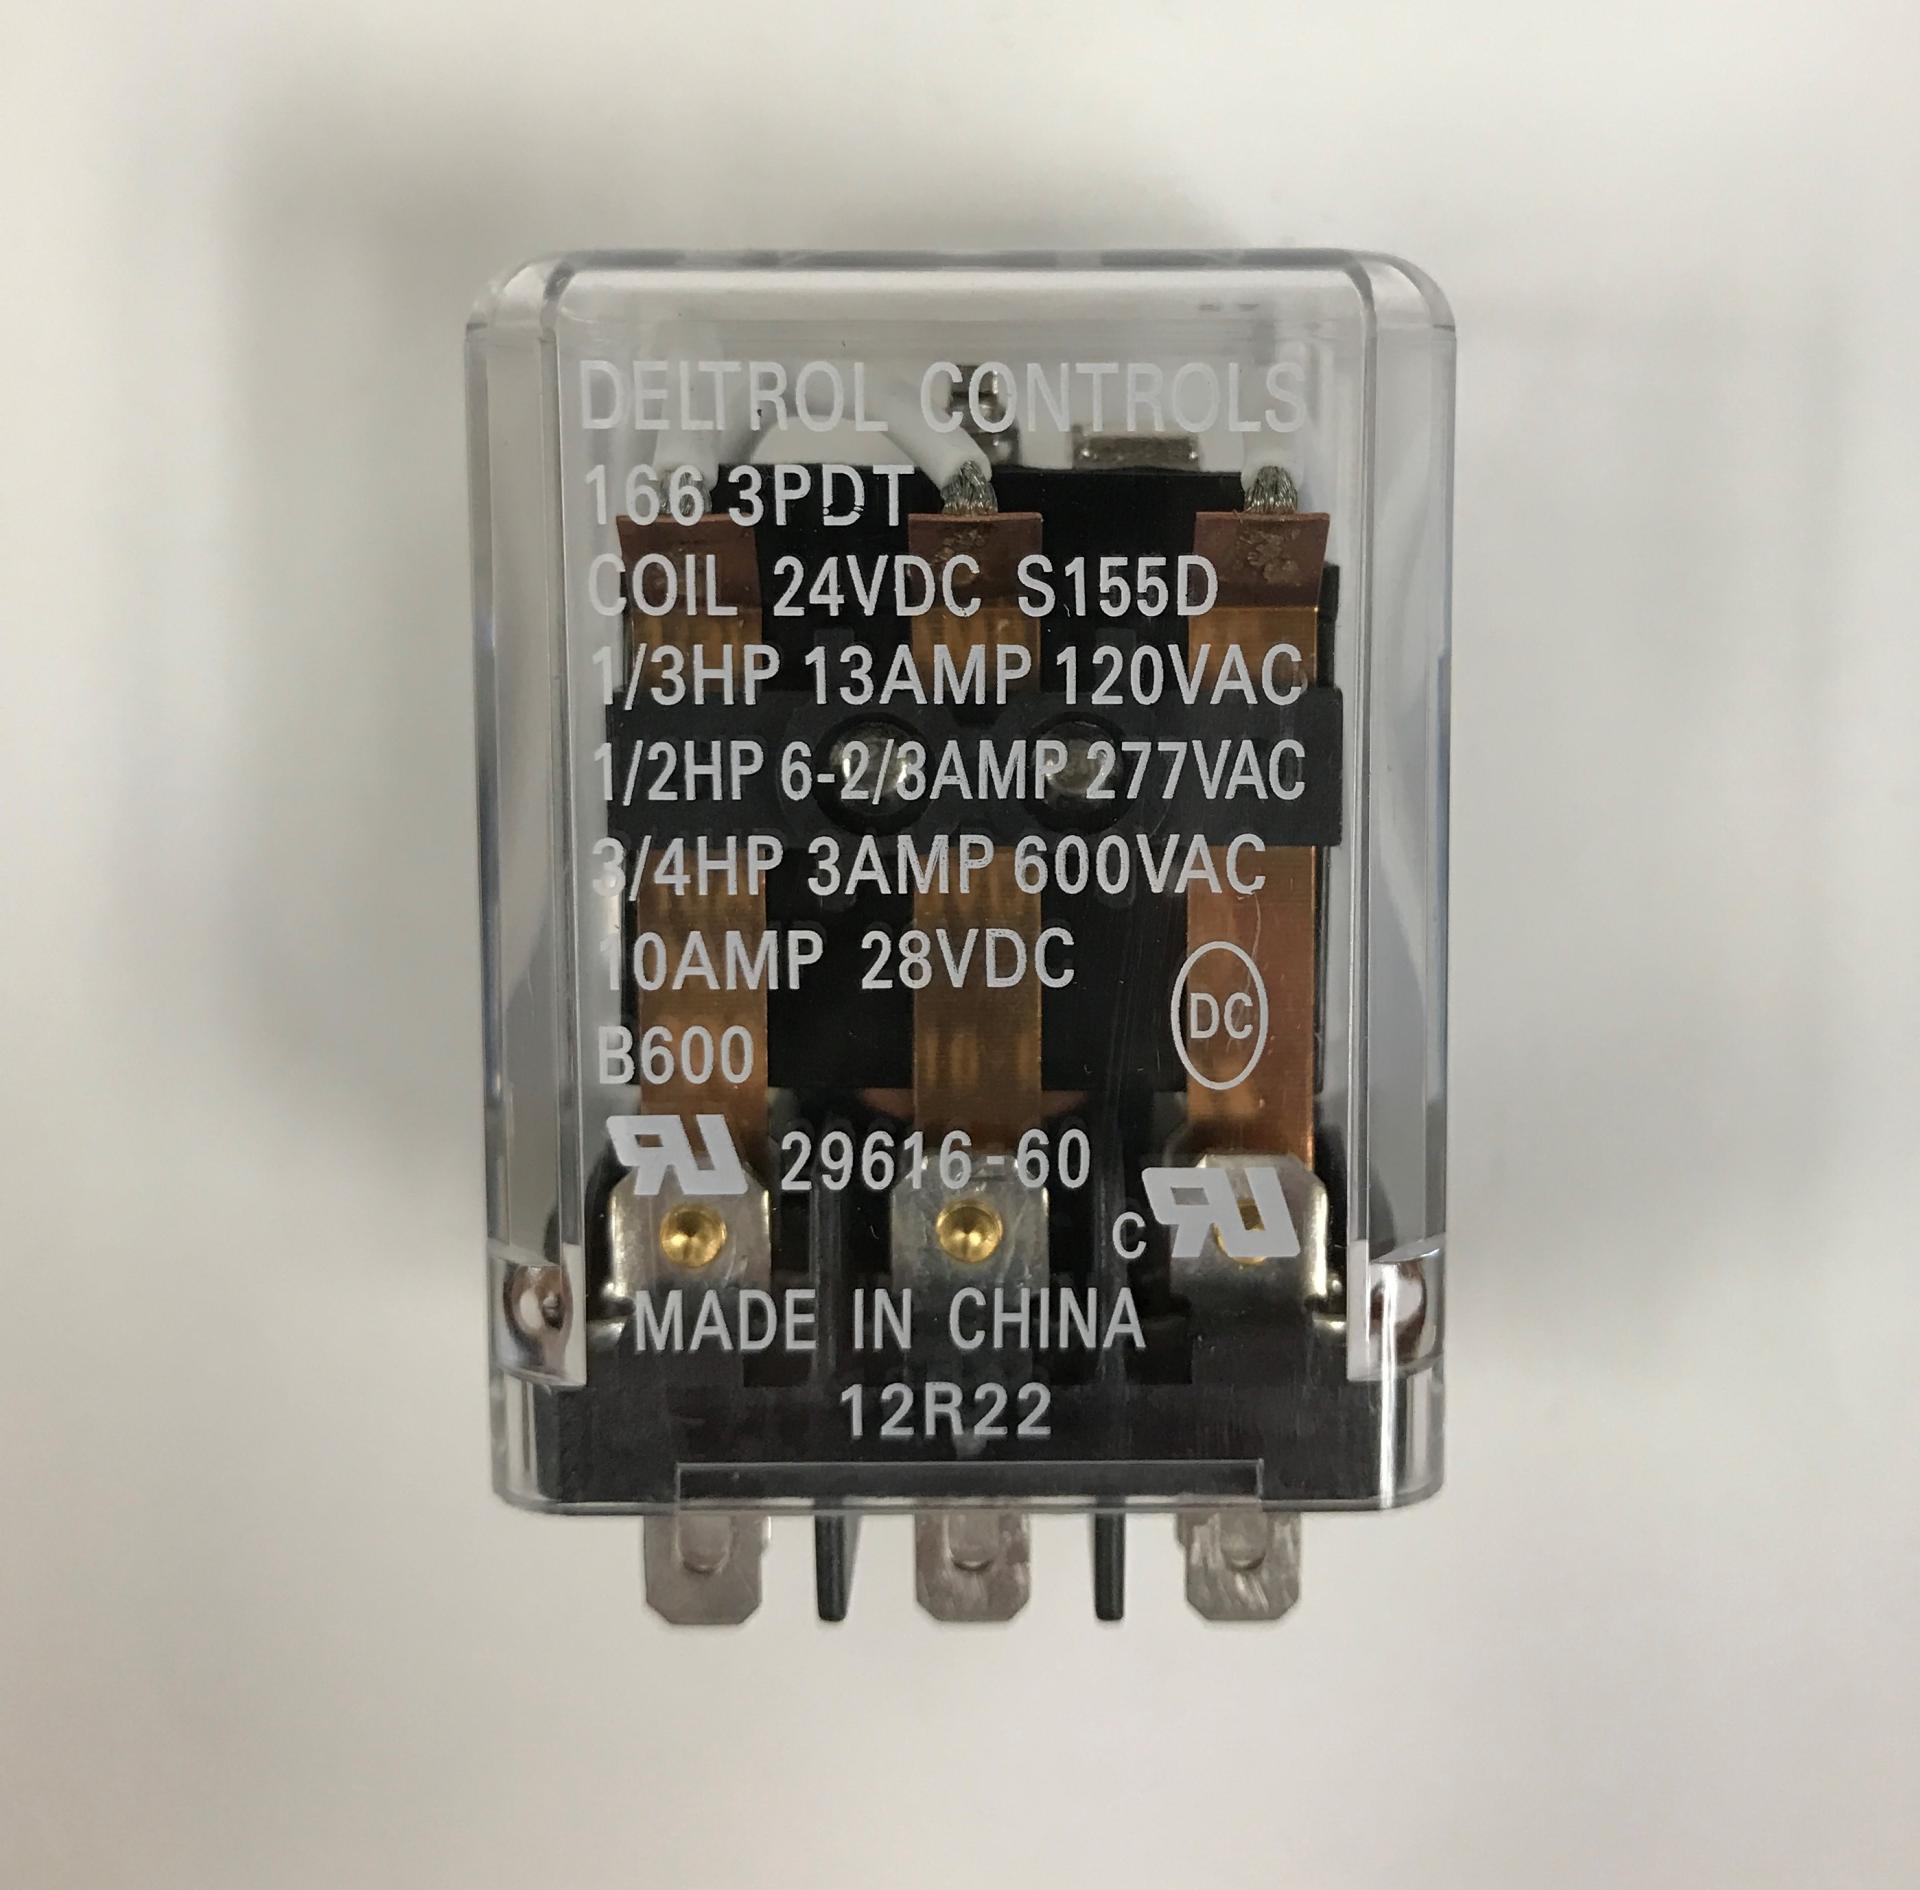 Details about   Deltrol Controls 166 DPDT 20307.84 Relay *Free Shipping* 8 Pin Sq,120 VAC Coil 